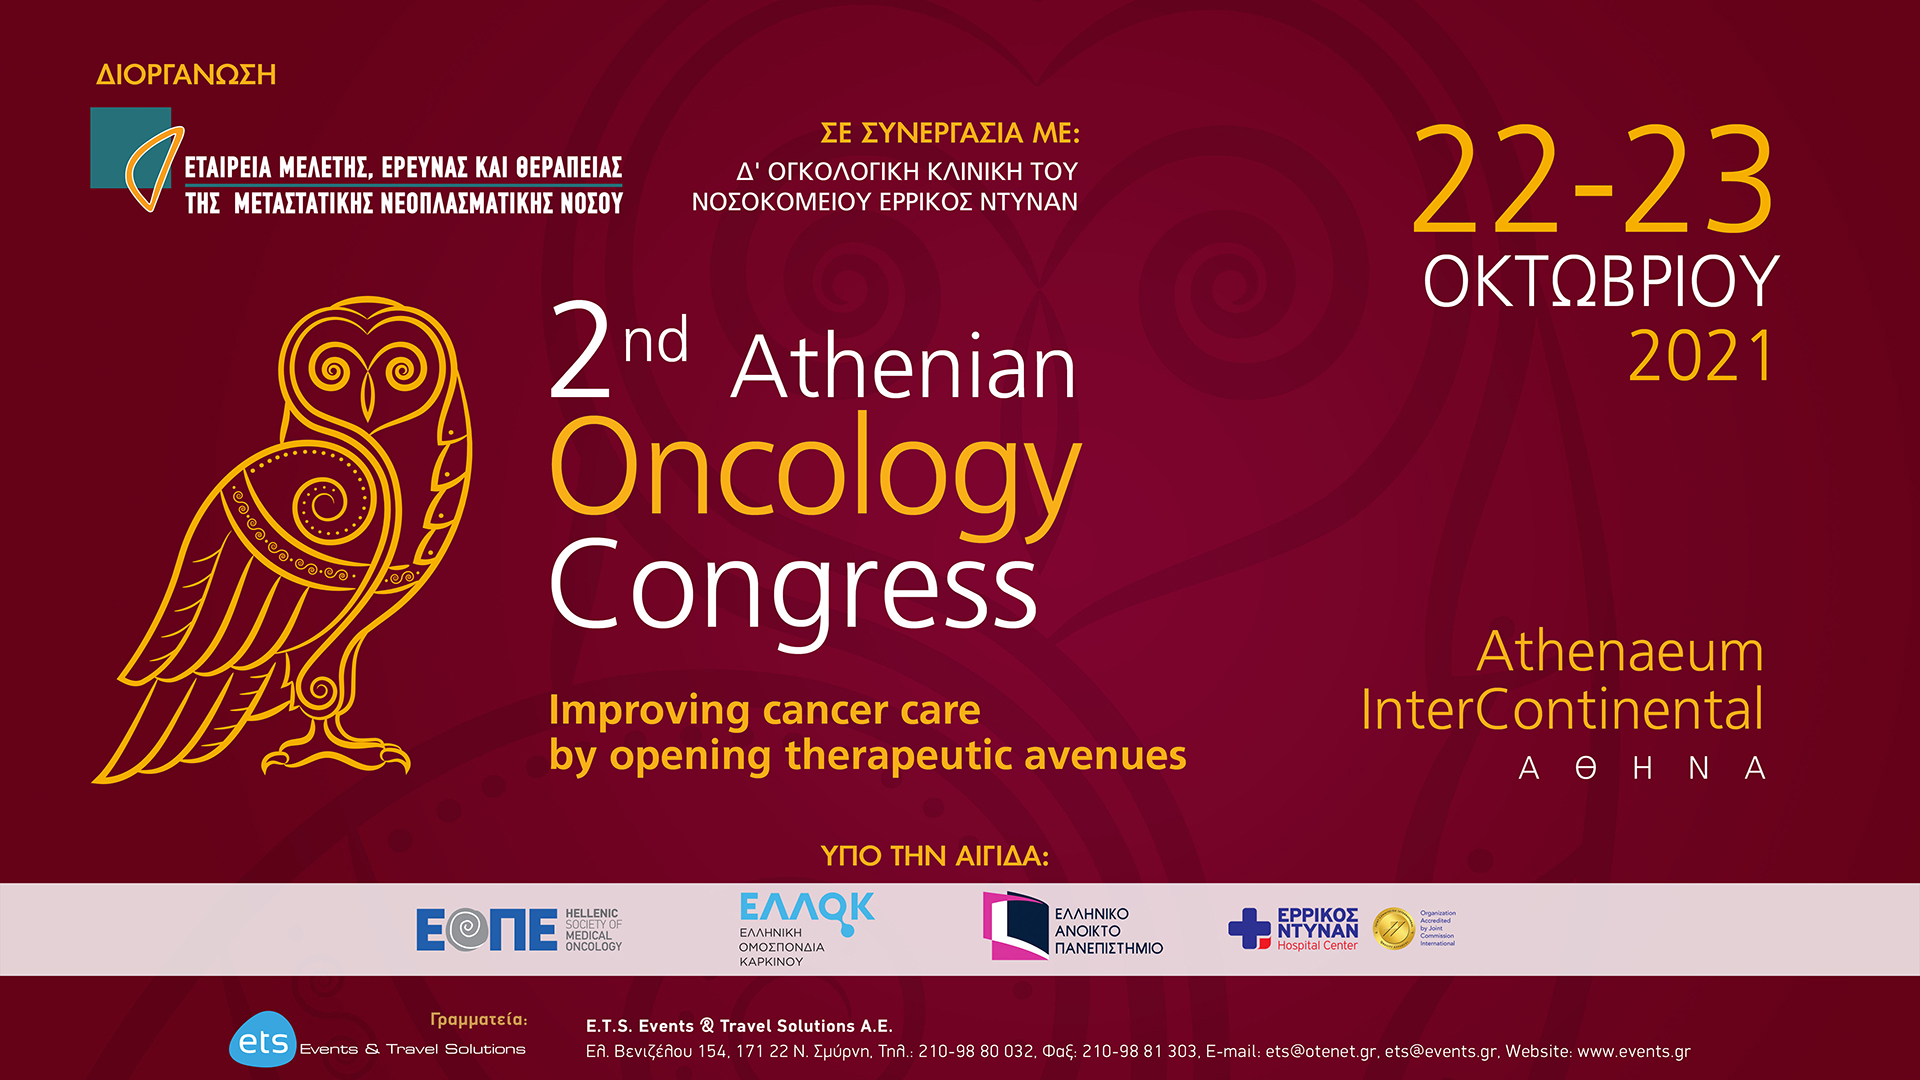 2nd Athenian Oncology Congress. Improving cancer care by opening therapeutic avenues.